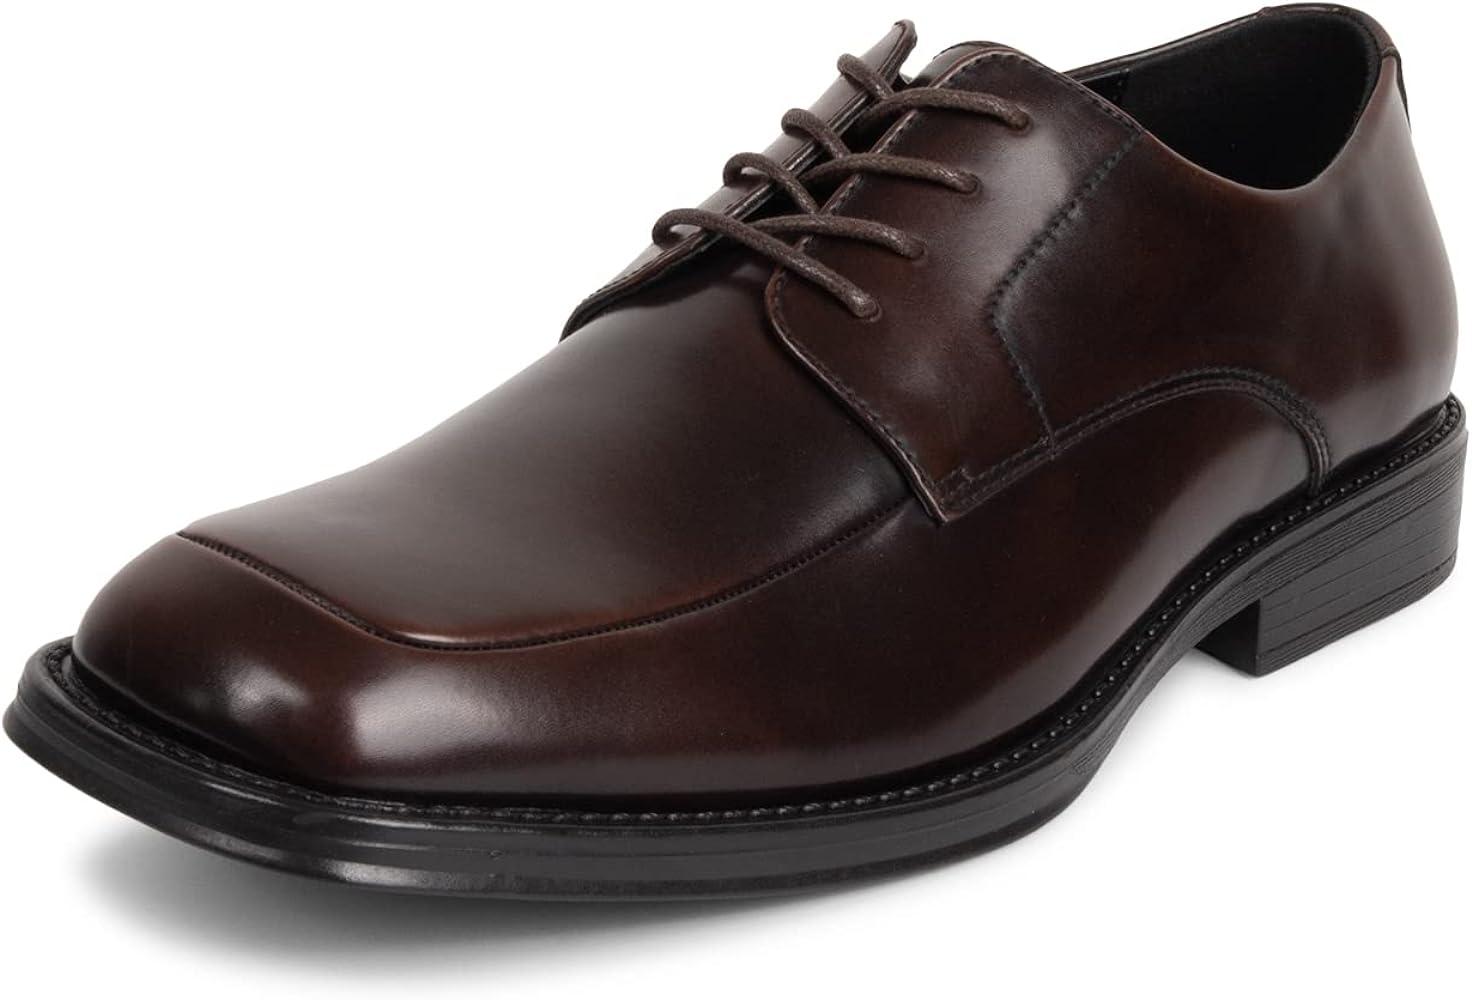 Kenneth Cole Men's Reaction Sim-plicity Oxford - Kenneth Cole - Chipi Online